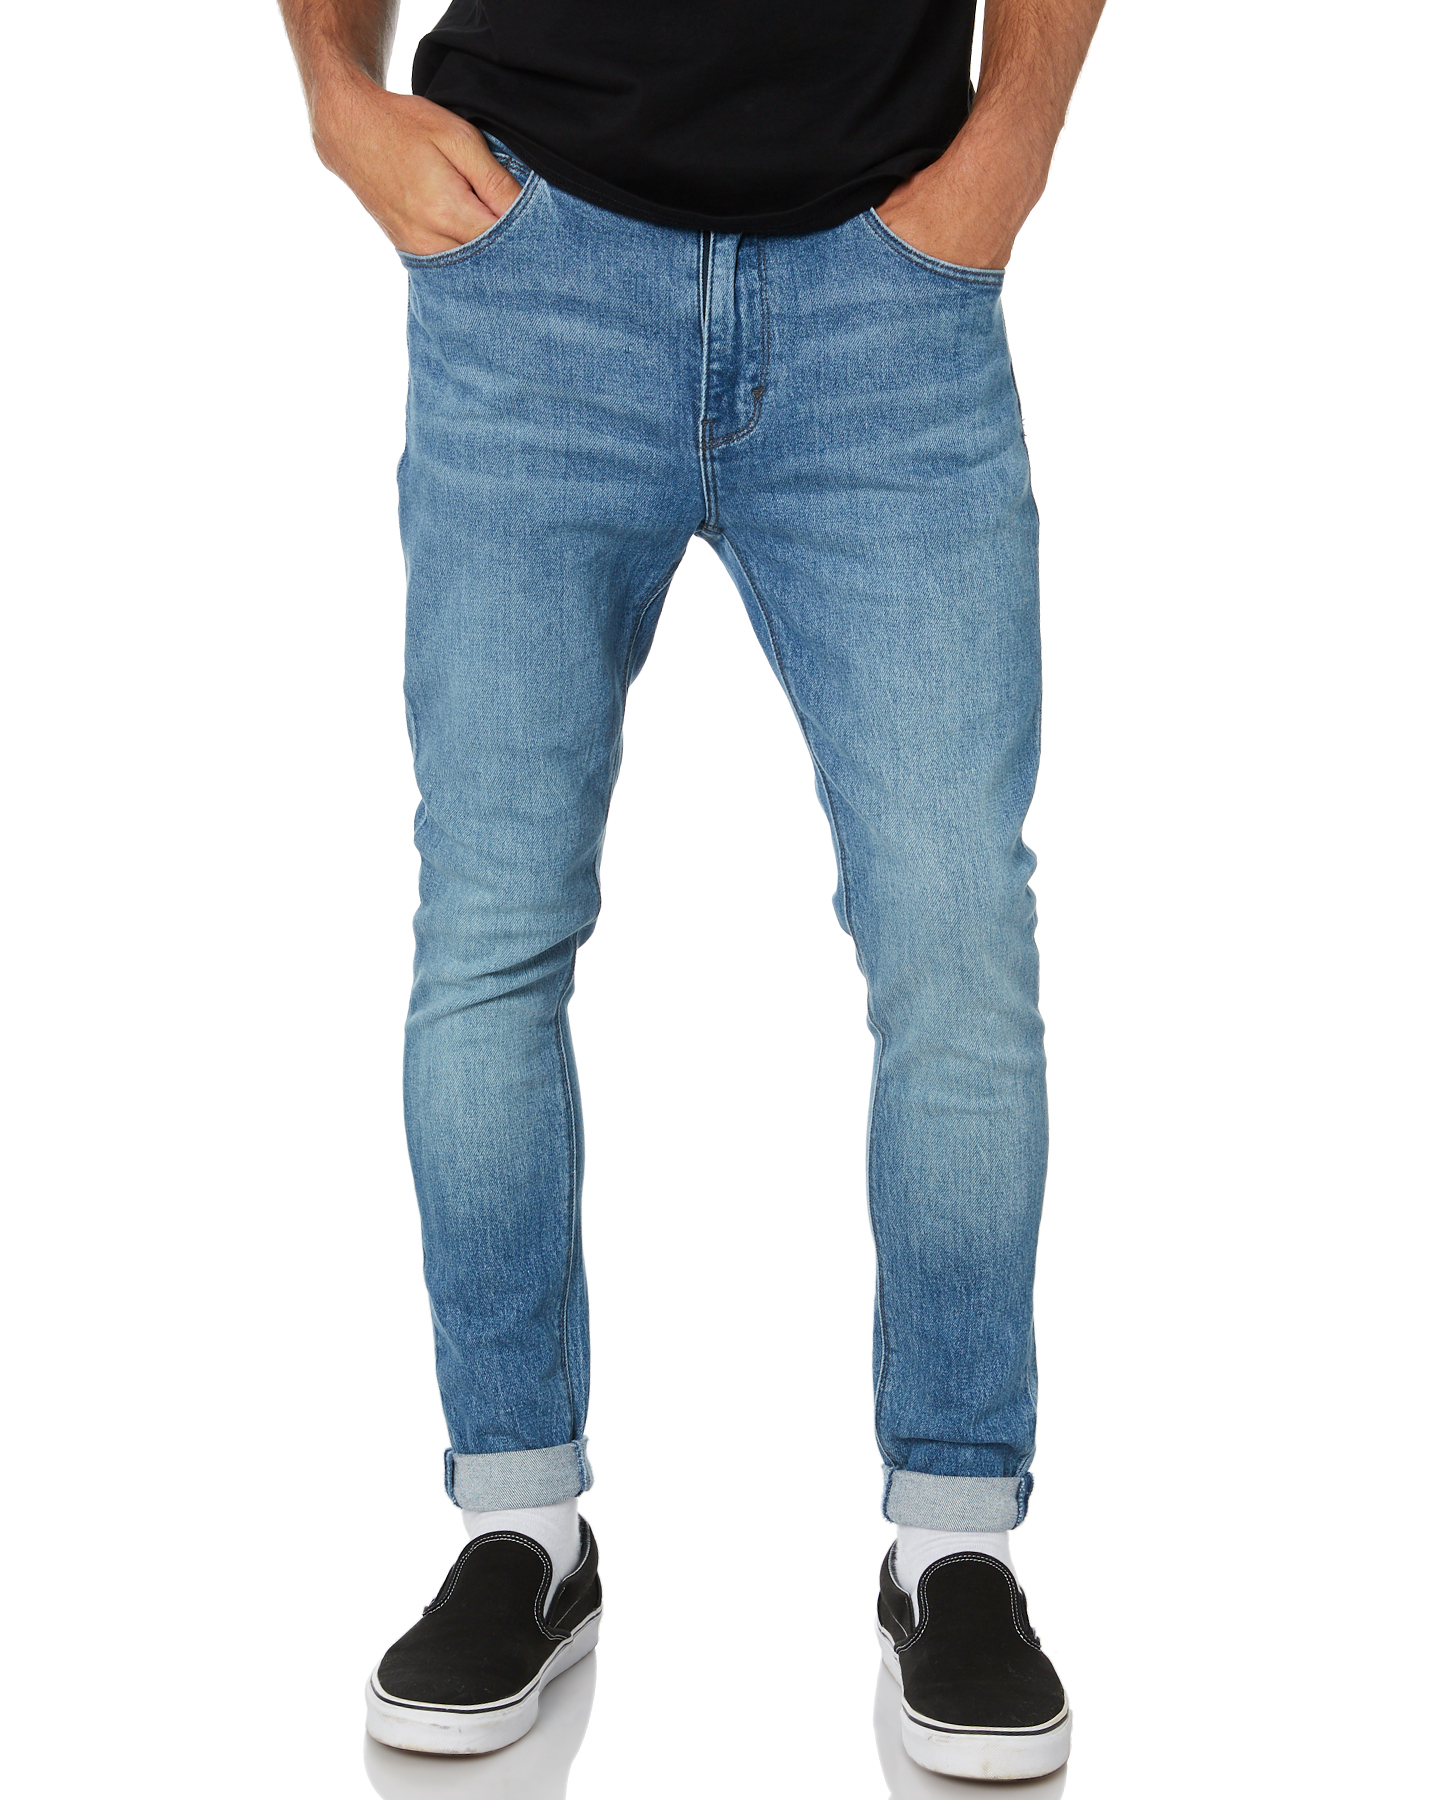 A.Brand A Dropped Skinny Turn Up Mens Jean - Passenger | SurfStitch